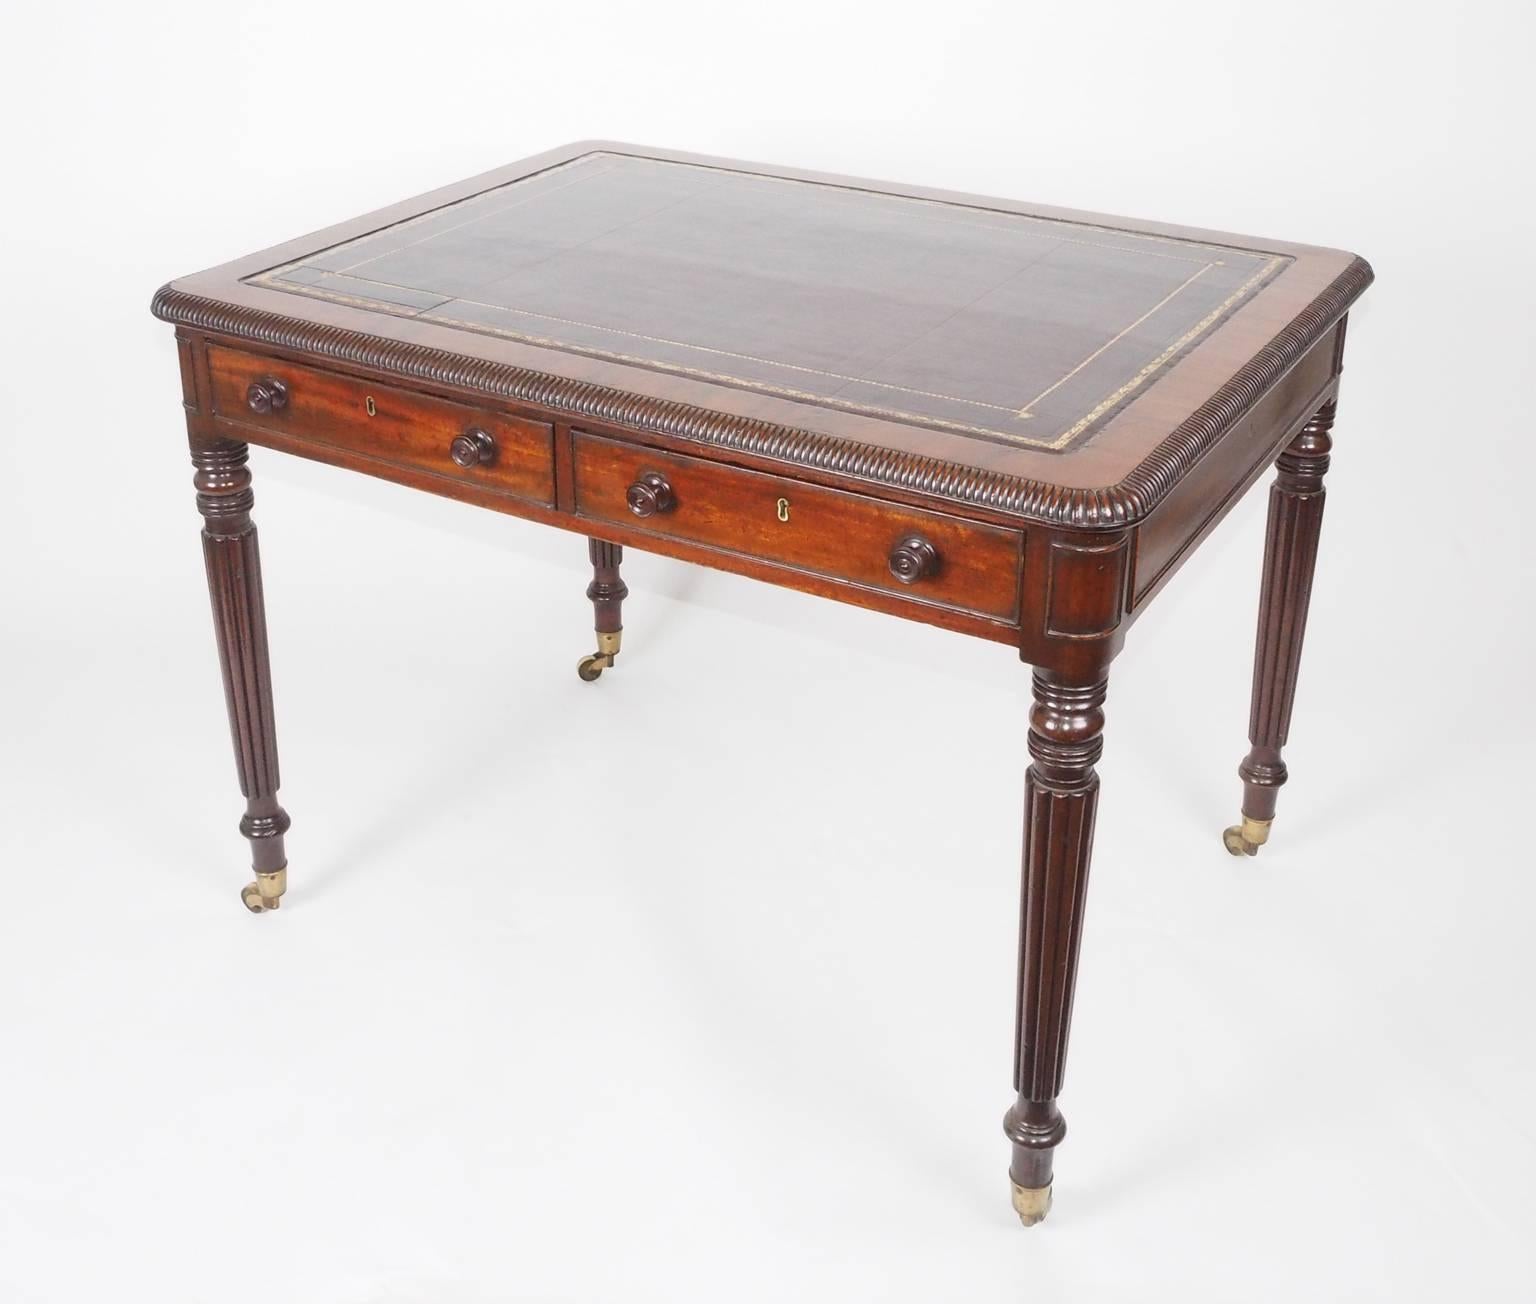 A George IV period leather lined mahogany writing table, the crossbanded mahogany
top with typical Gillows gadrooned moulding. The finely turned and reeded legs are another Gillow 
feature. Attributed to Gillows, bearing a later stamp for Edwards